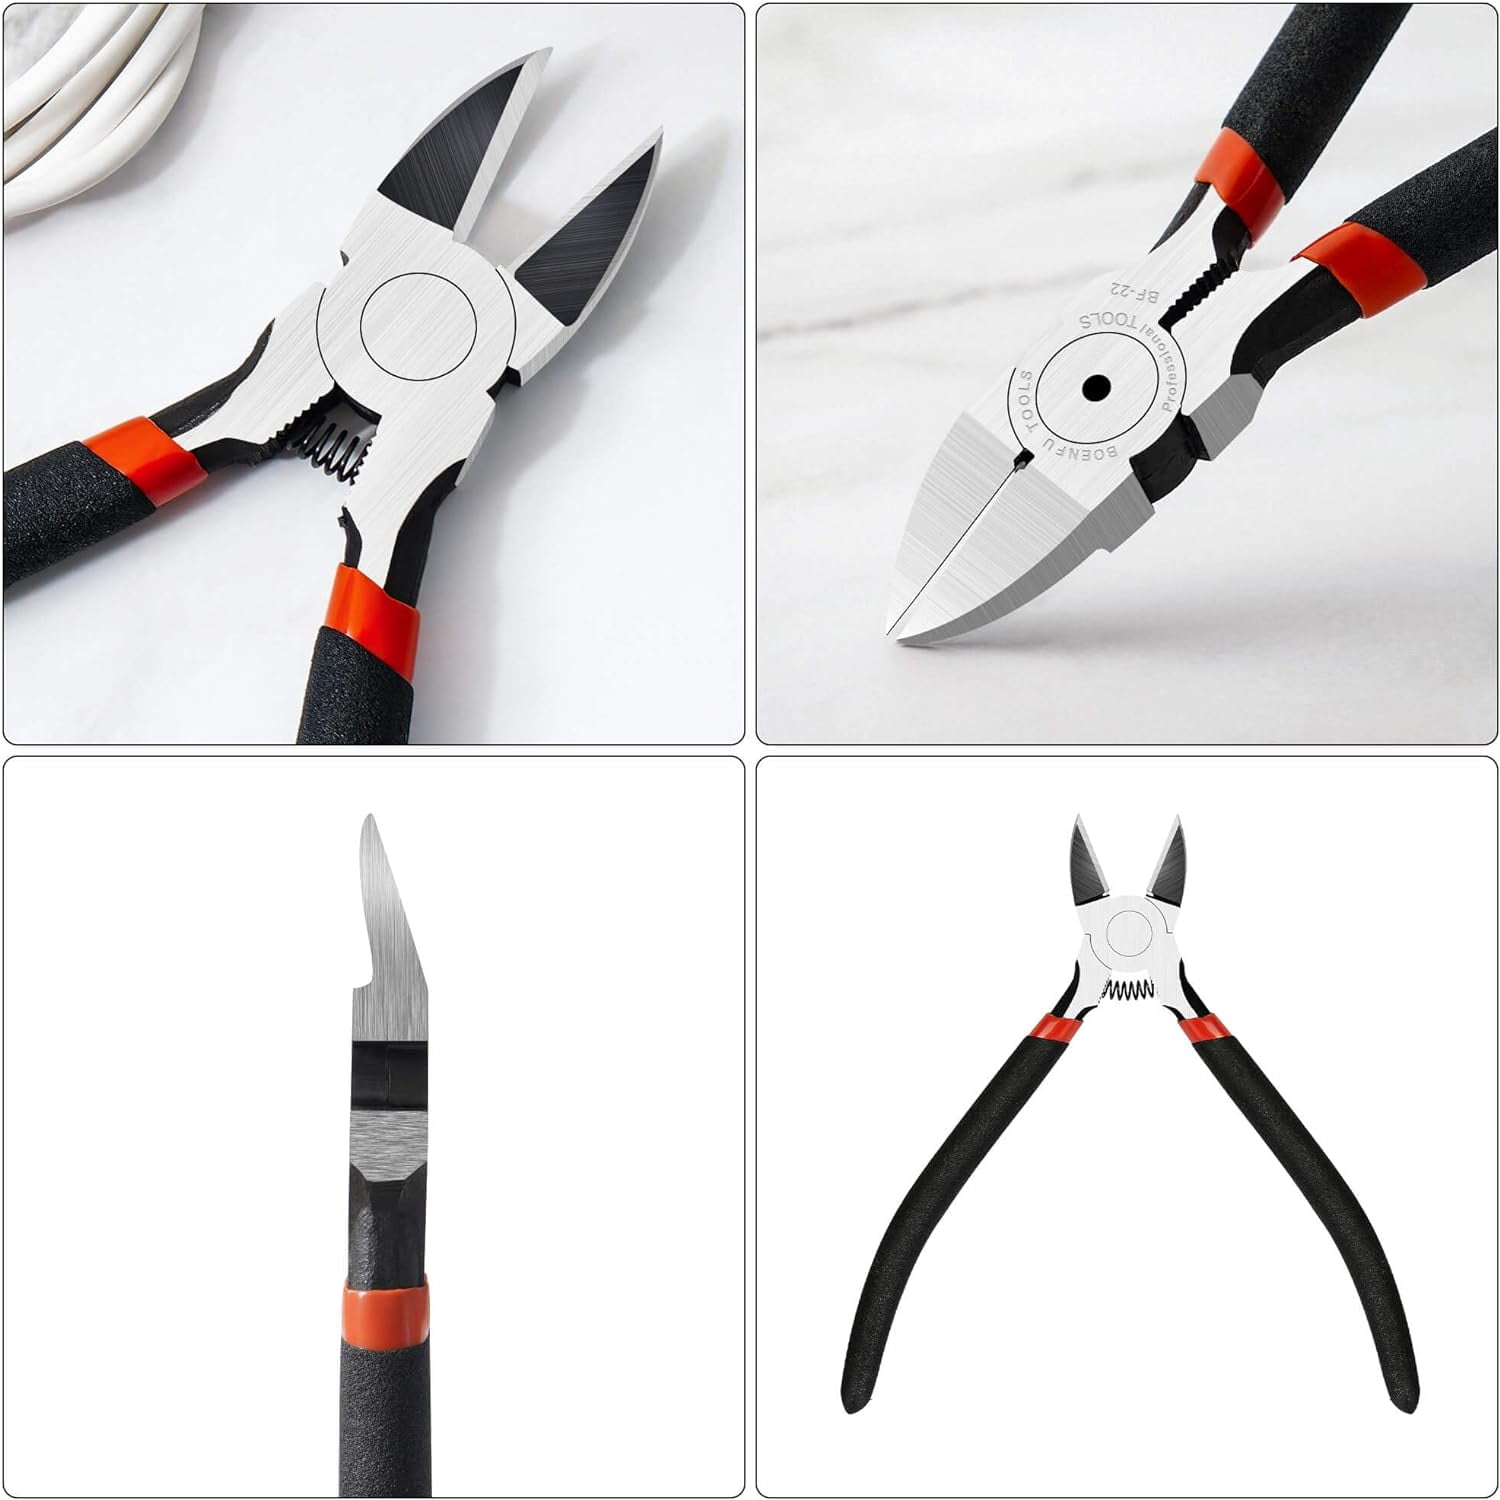 Unboxing: BOOSDEN Tools; Linesman Pliers & Diagonal Wire Cutters